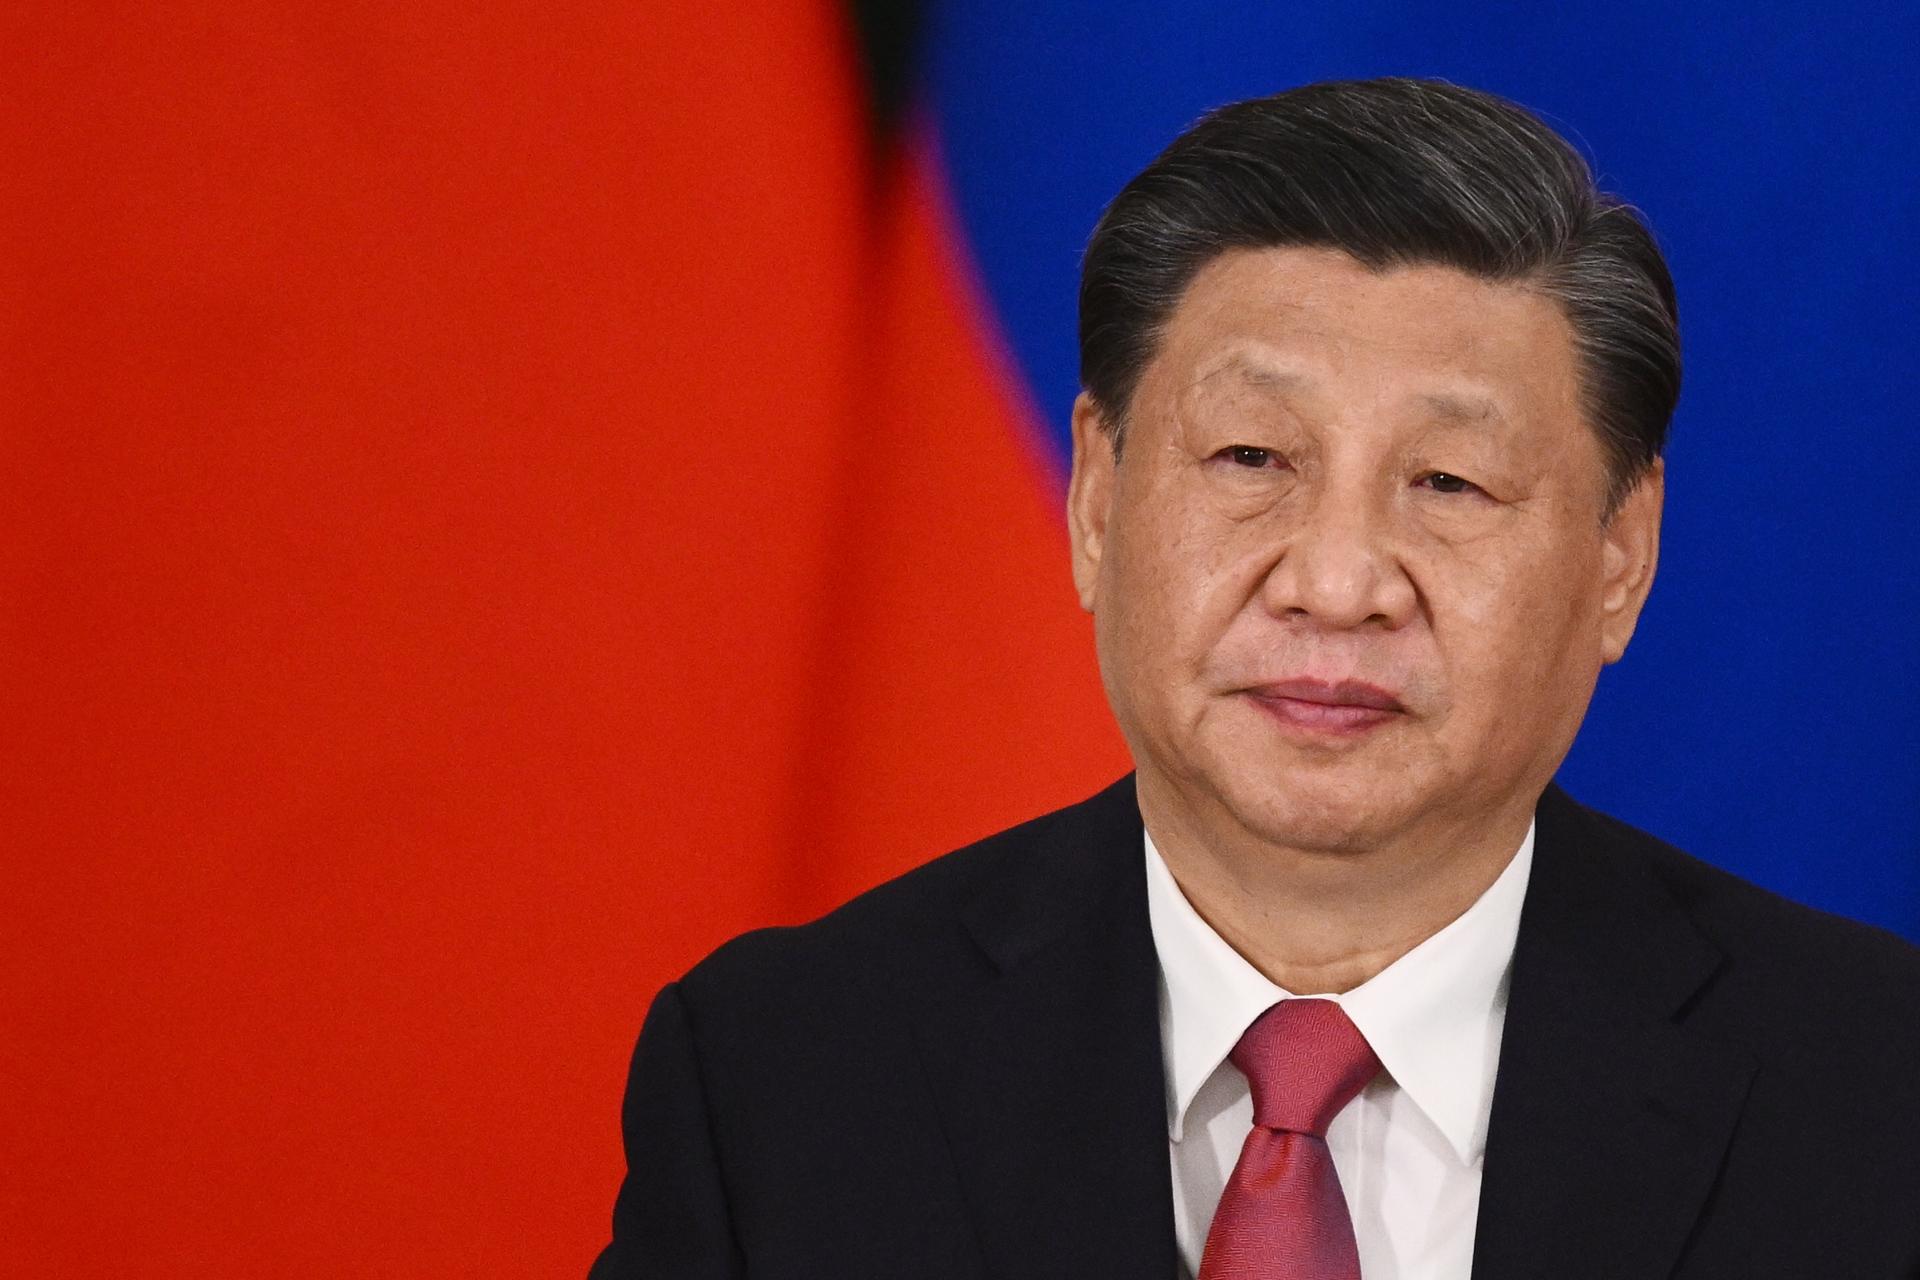 Chinese President Xi Jinping attends the signing ceremony of documents concerning the further development and cooperation between Russia and China at the Moscow Kremlin, Russia, 21 March 2023. EFE-EPA FILE/VLADIMIR ASTAPKOVICH/SPUTNIK/ KREMLIN POOL MANDATORY CREDIT